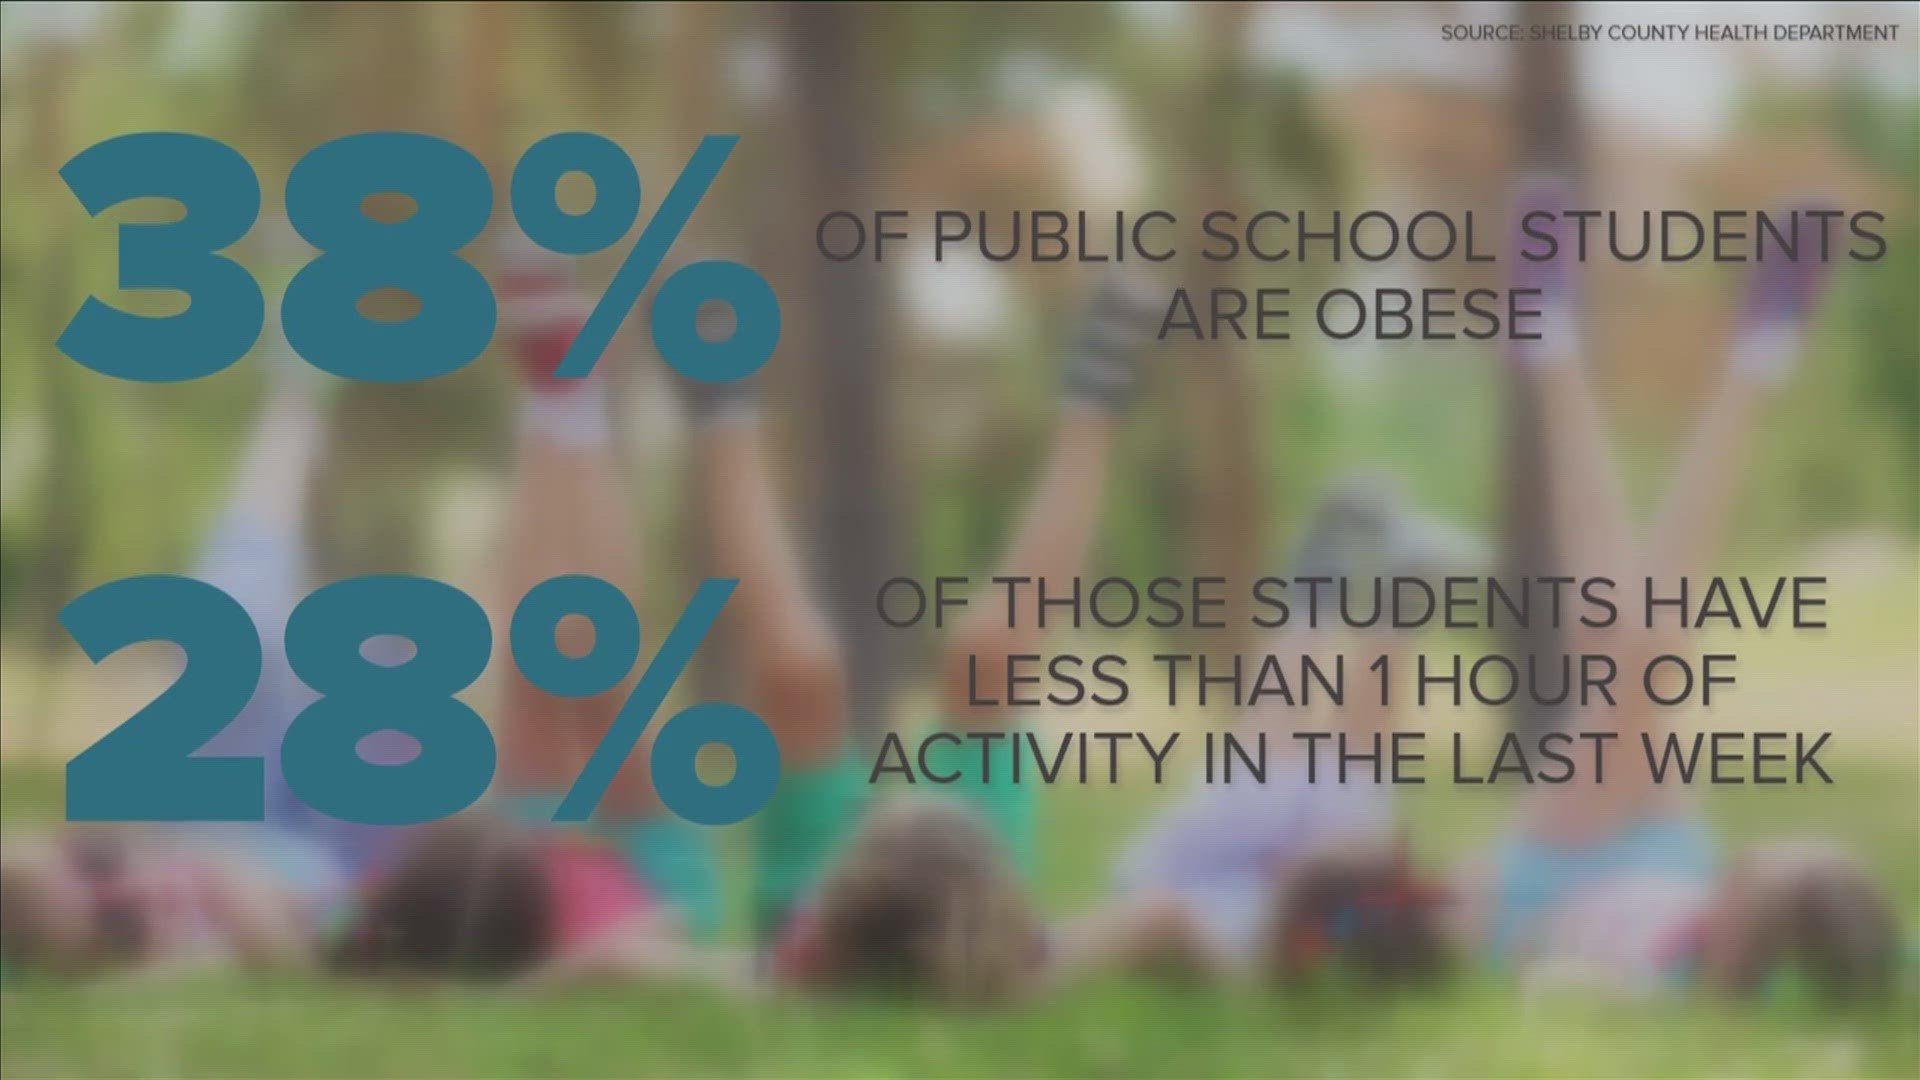 According to the Shelby County Health Department 38% of public-school students are overweight or obese.